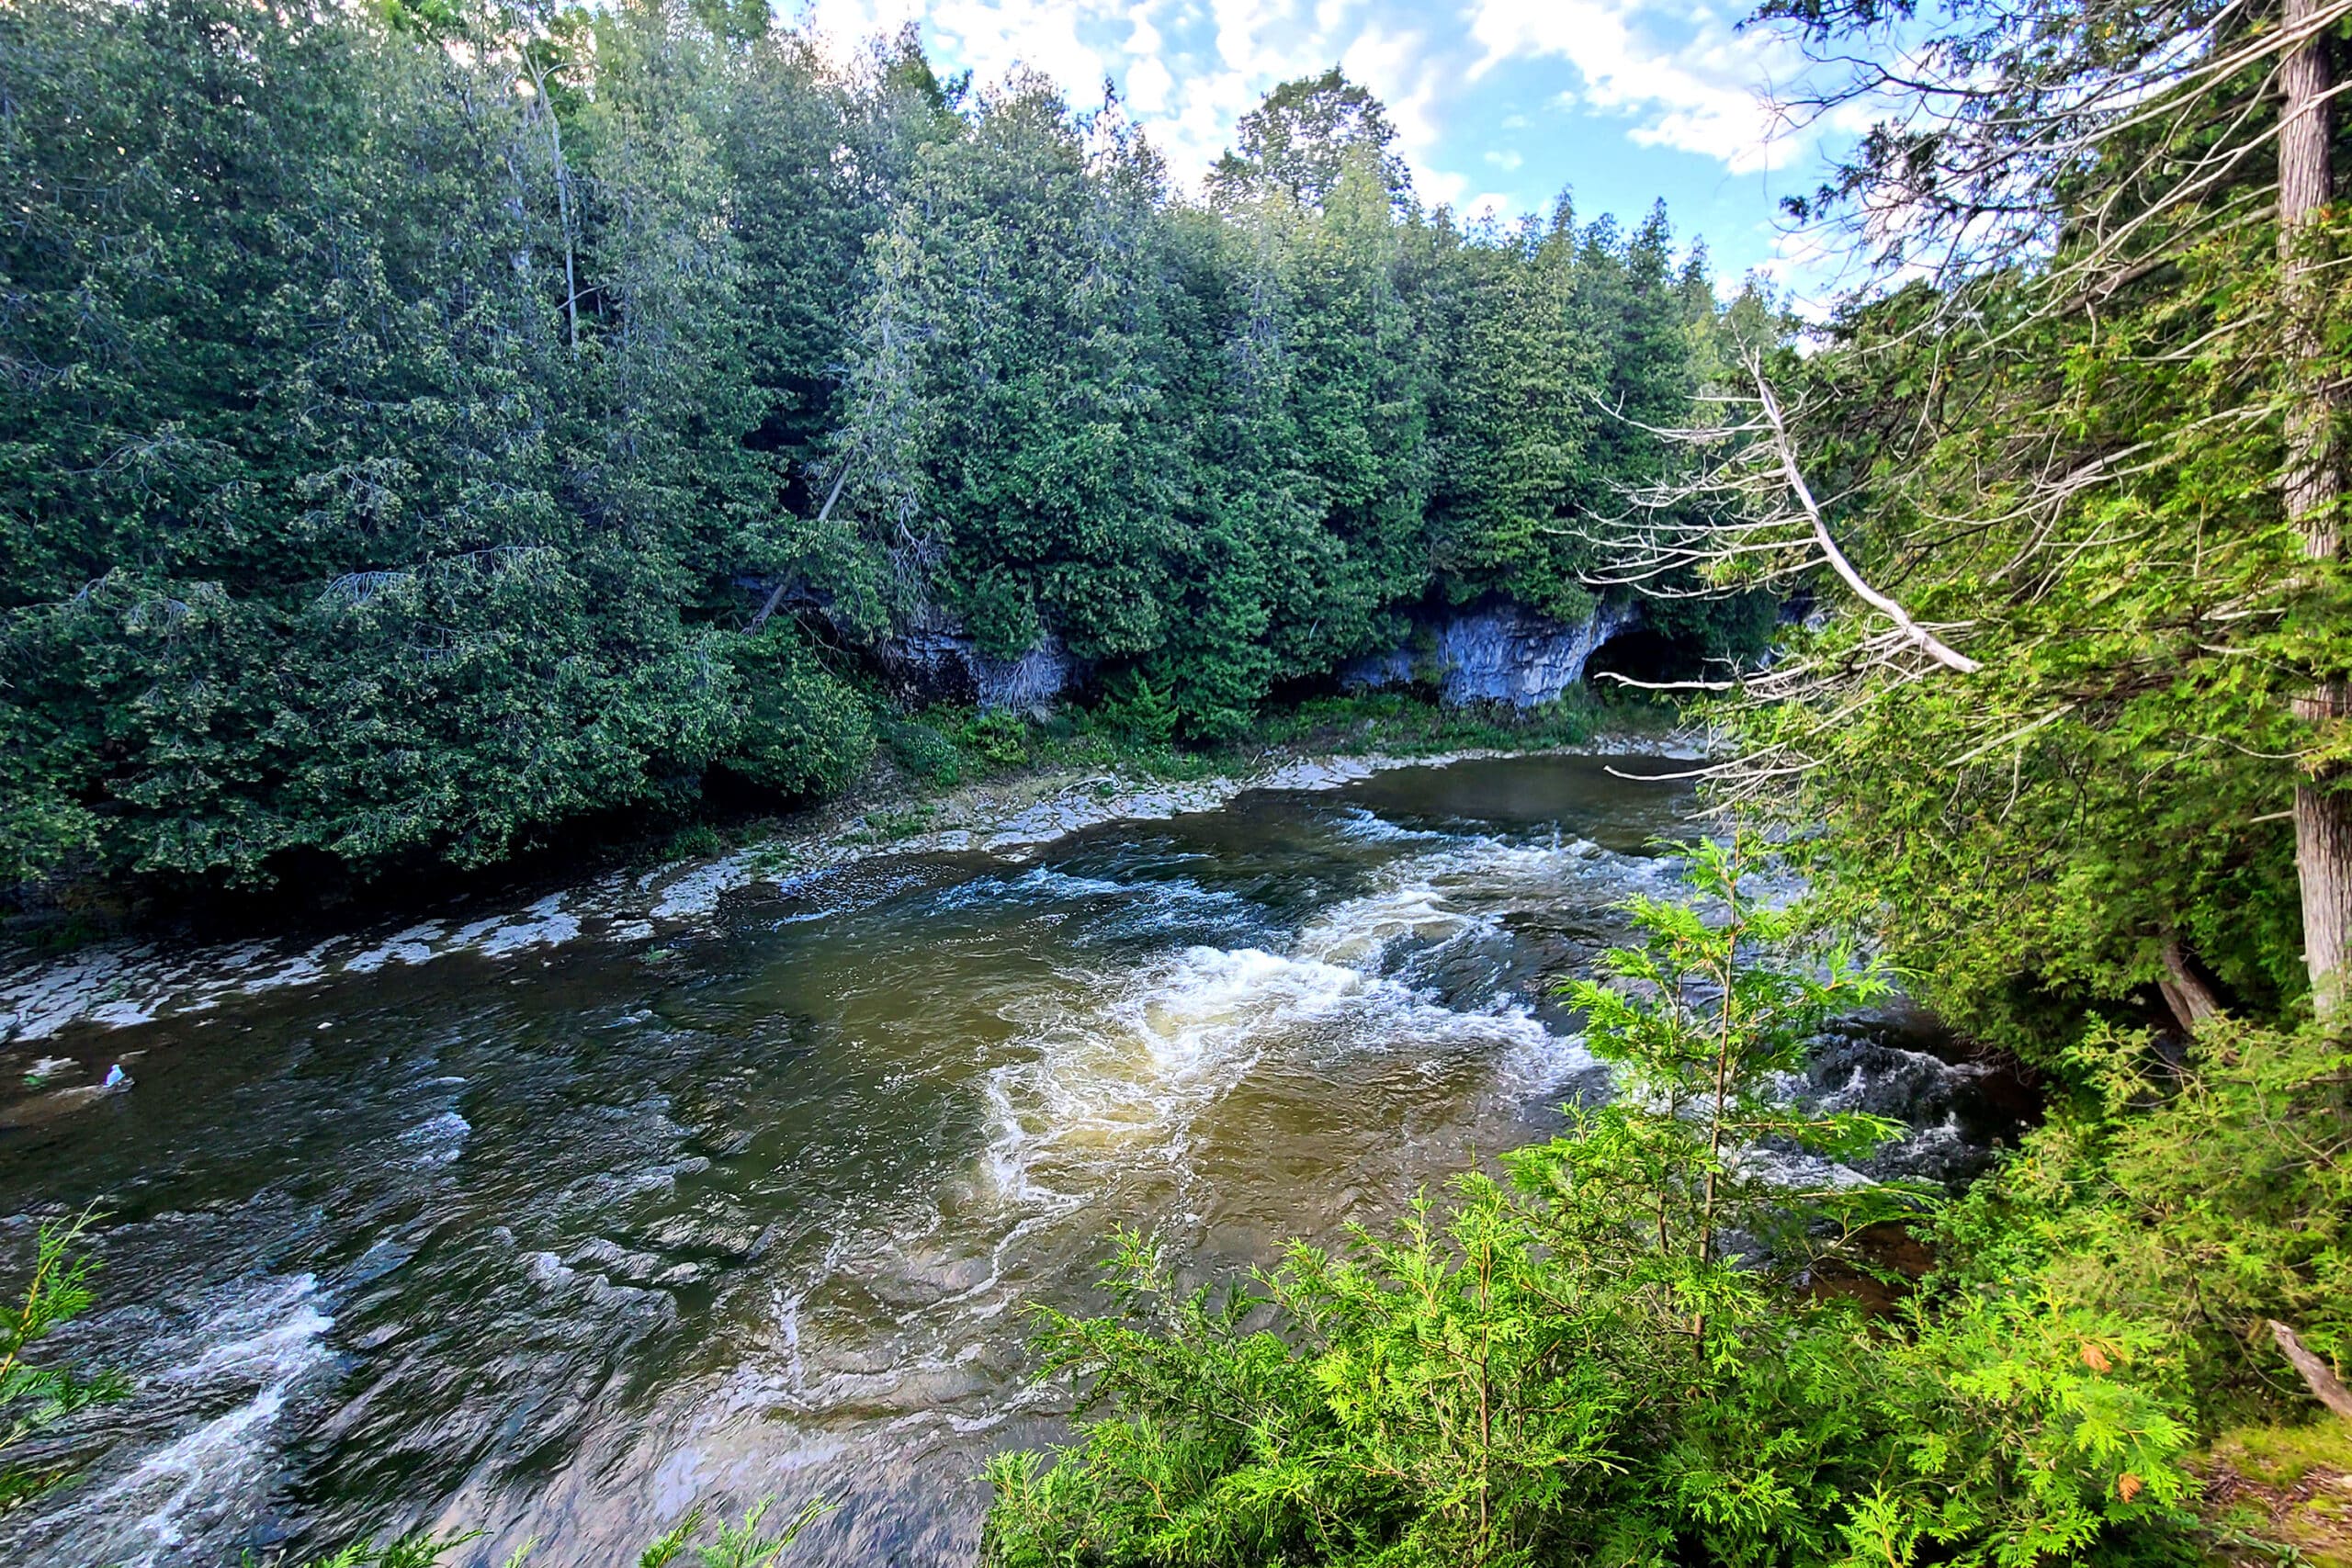 White water rapids in a gorge lined with pine trees.